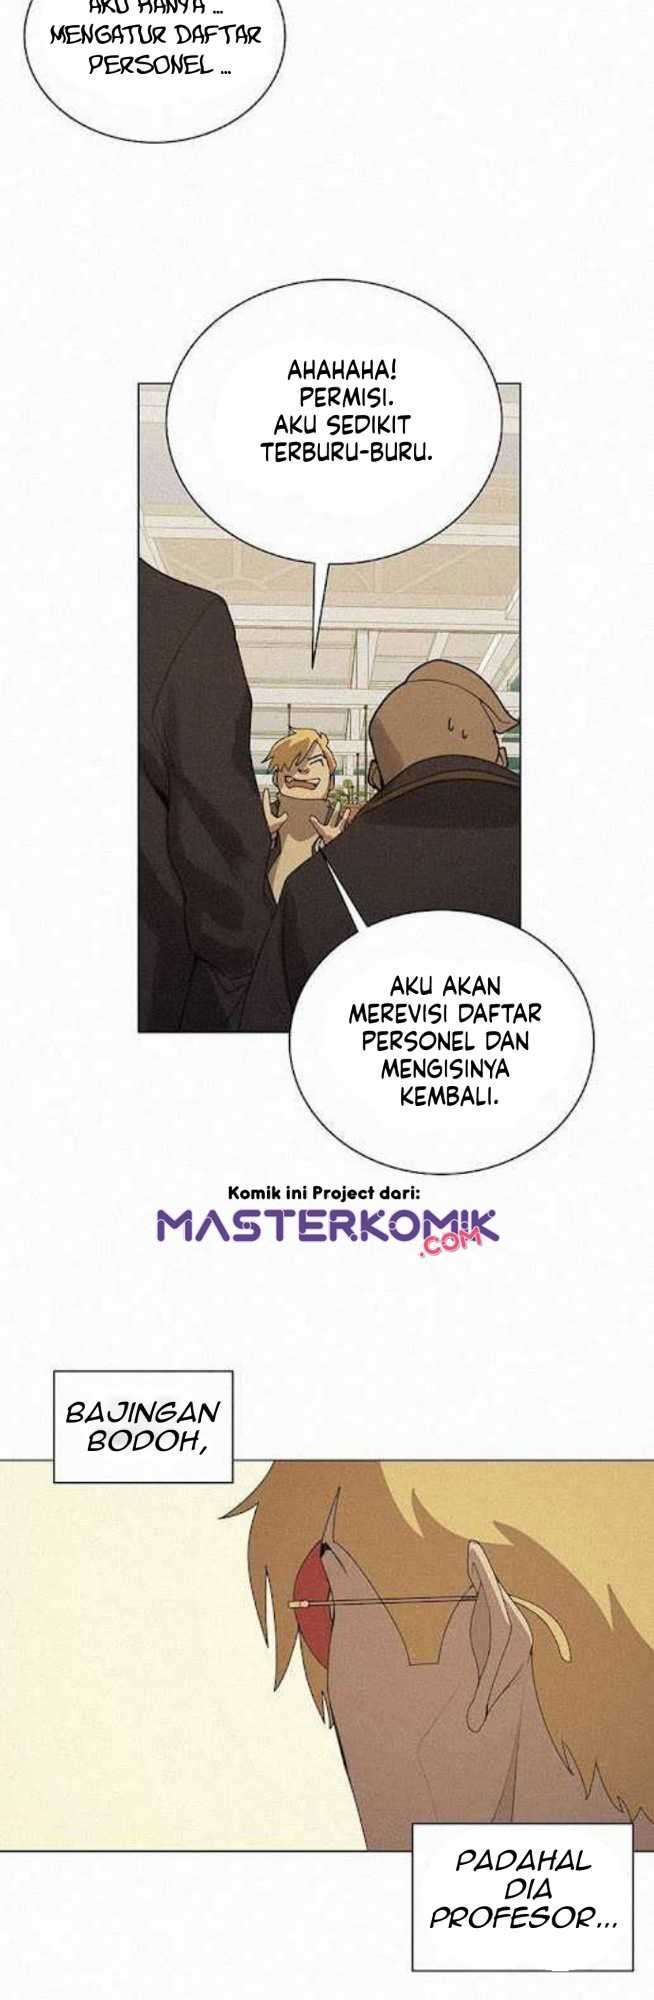 The Book Eating Magician Chapter 04